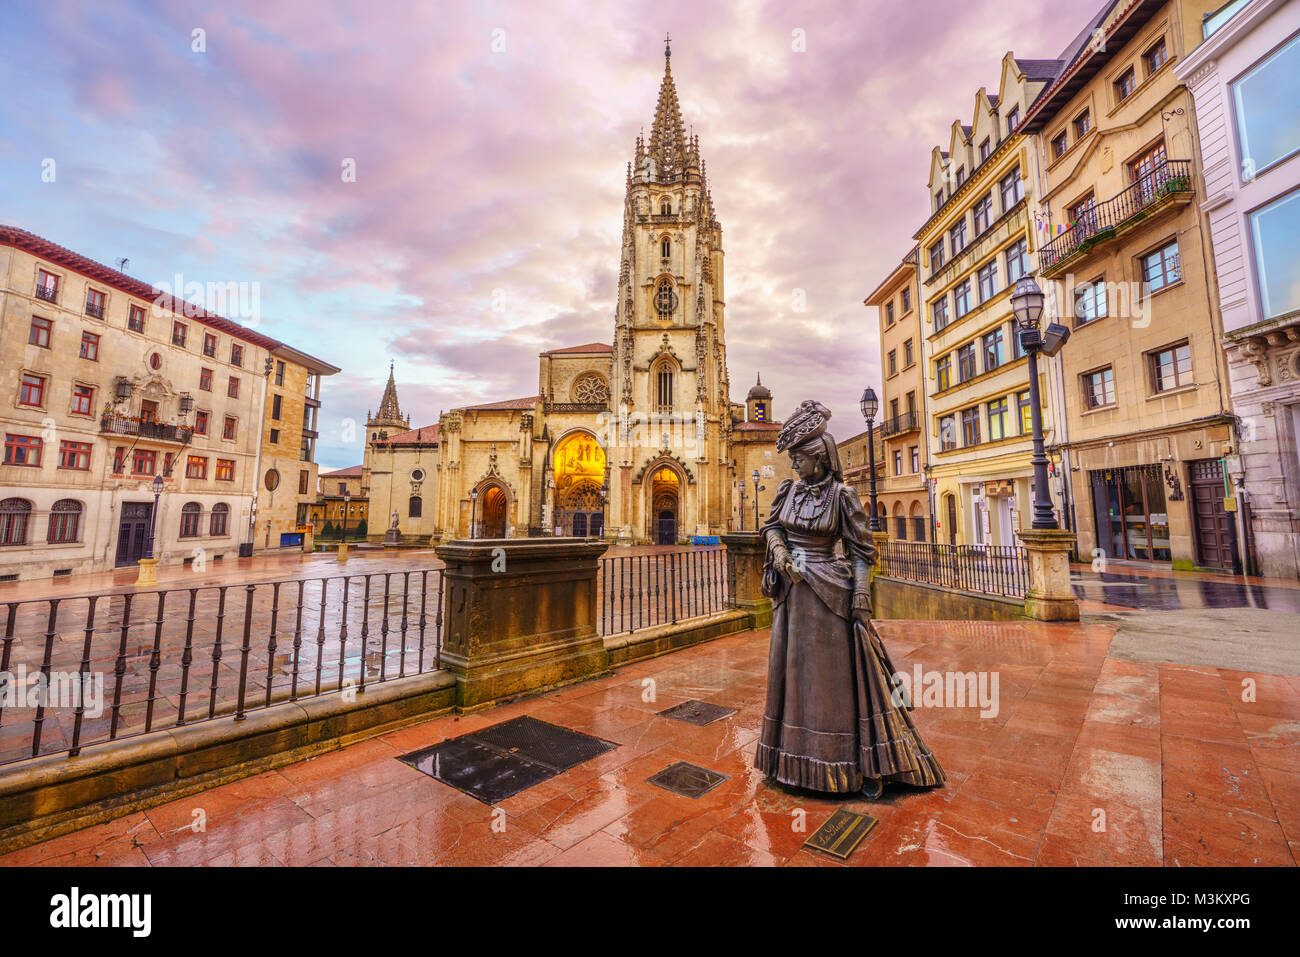 The Cathedral of Oviedo, Spain, was founded by King Fruela I of Asturias in 781 AD and is located in the Alfonso II square. Stock Photo